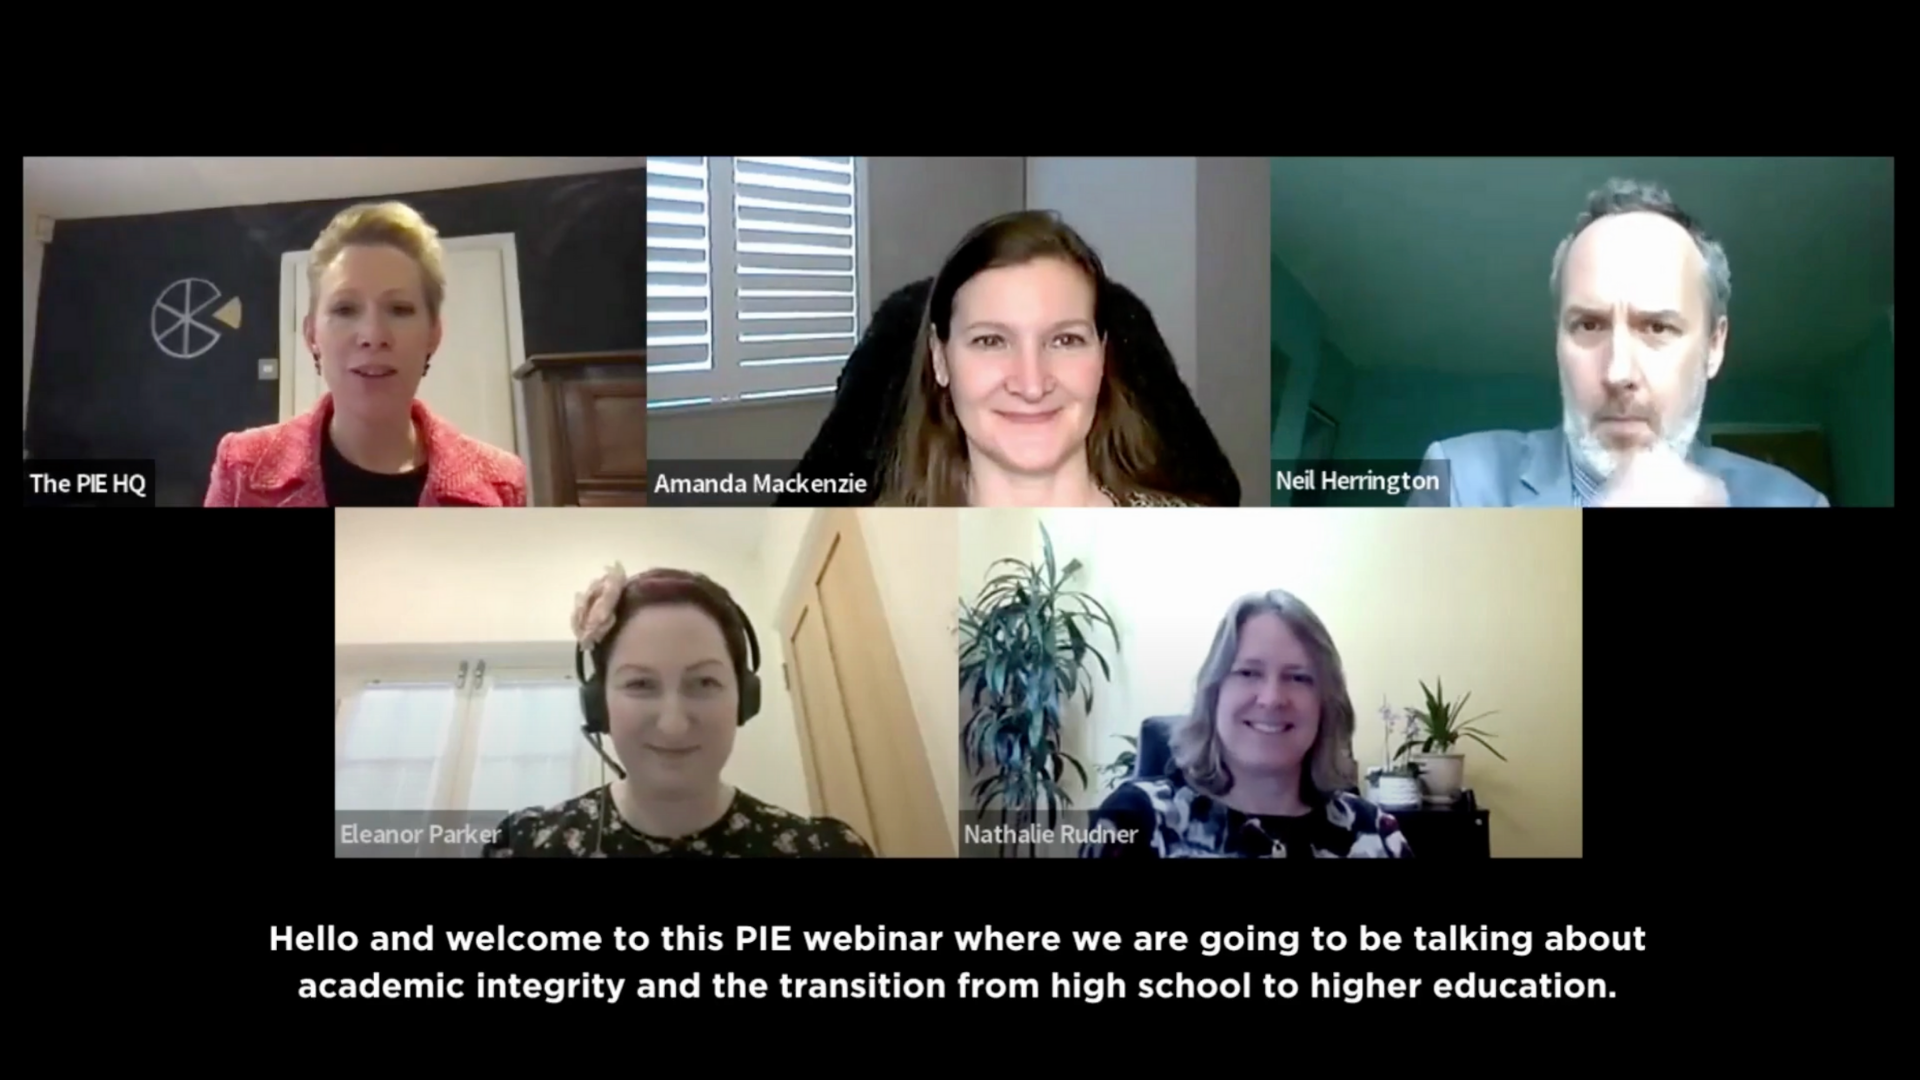 The PIE Webinar on Academic Integrity: Rosedale discusses skill development, assessment and more with educators across 39 countries